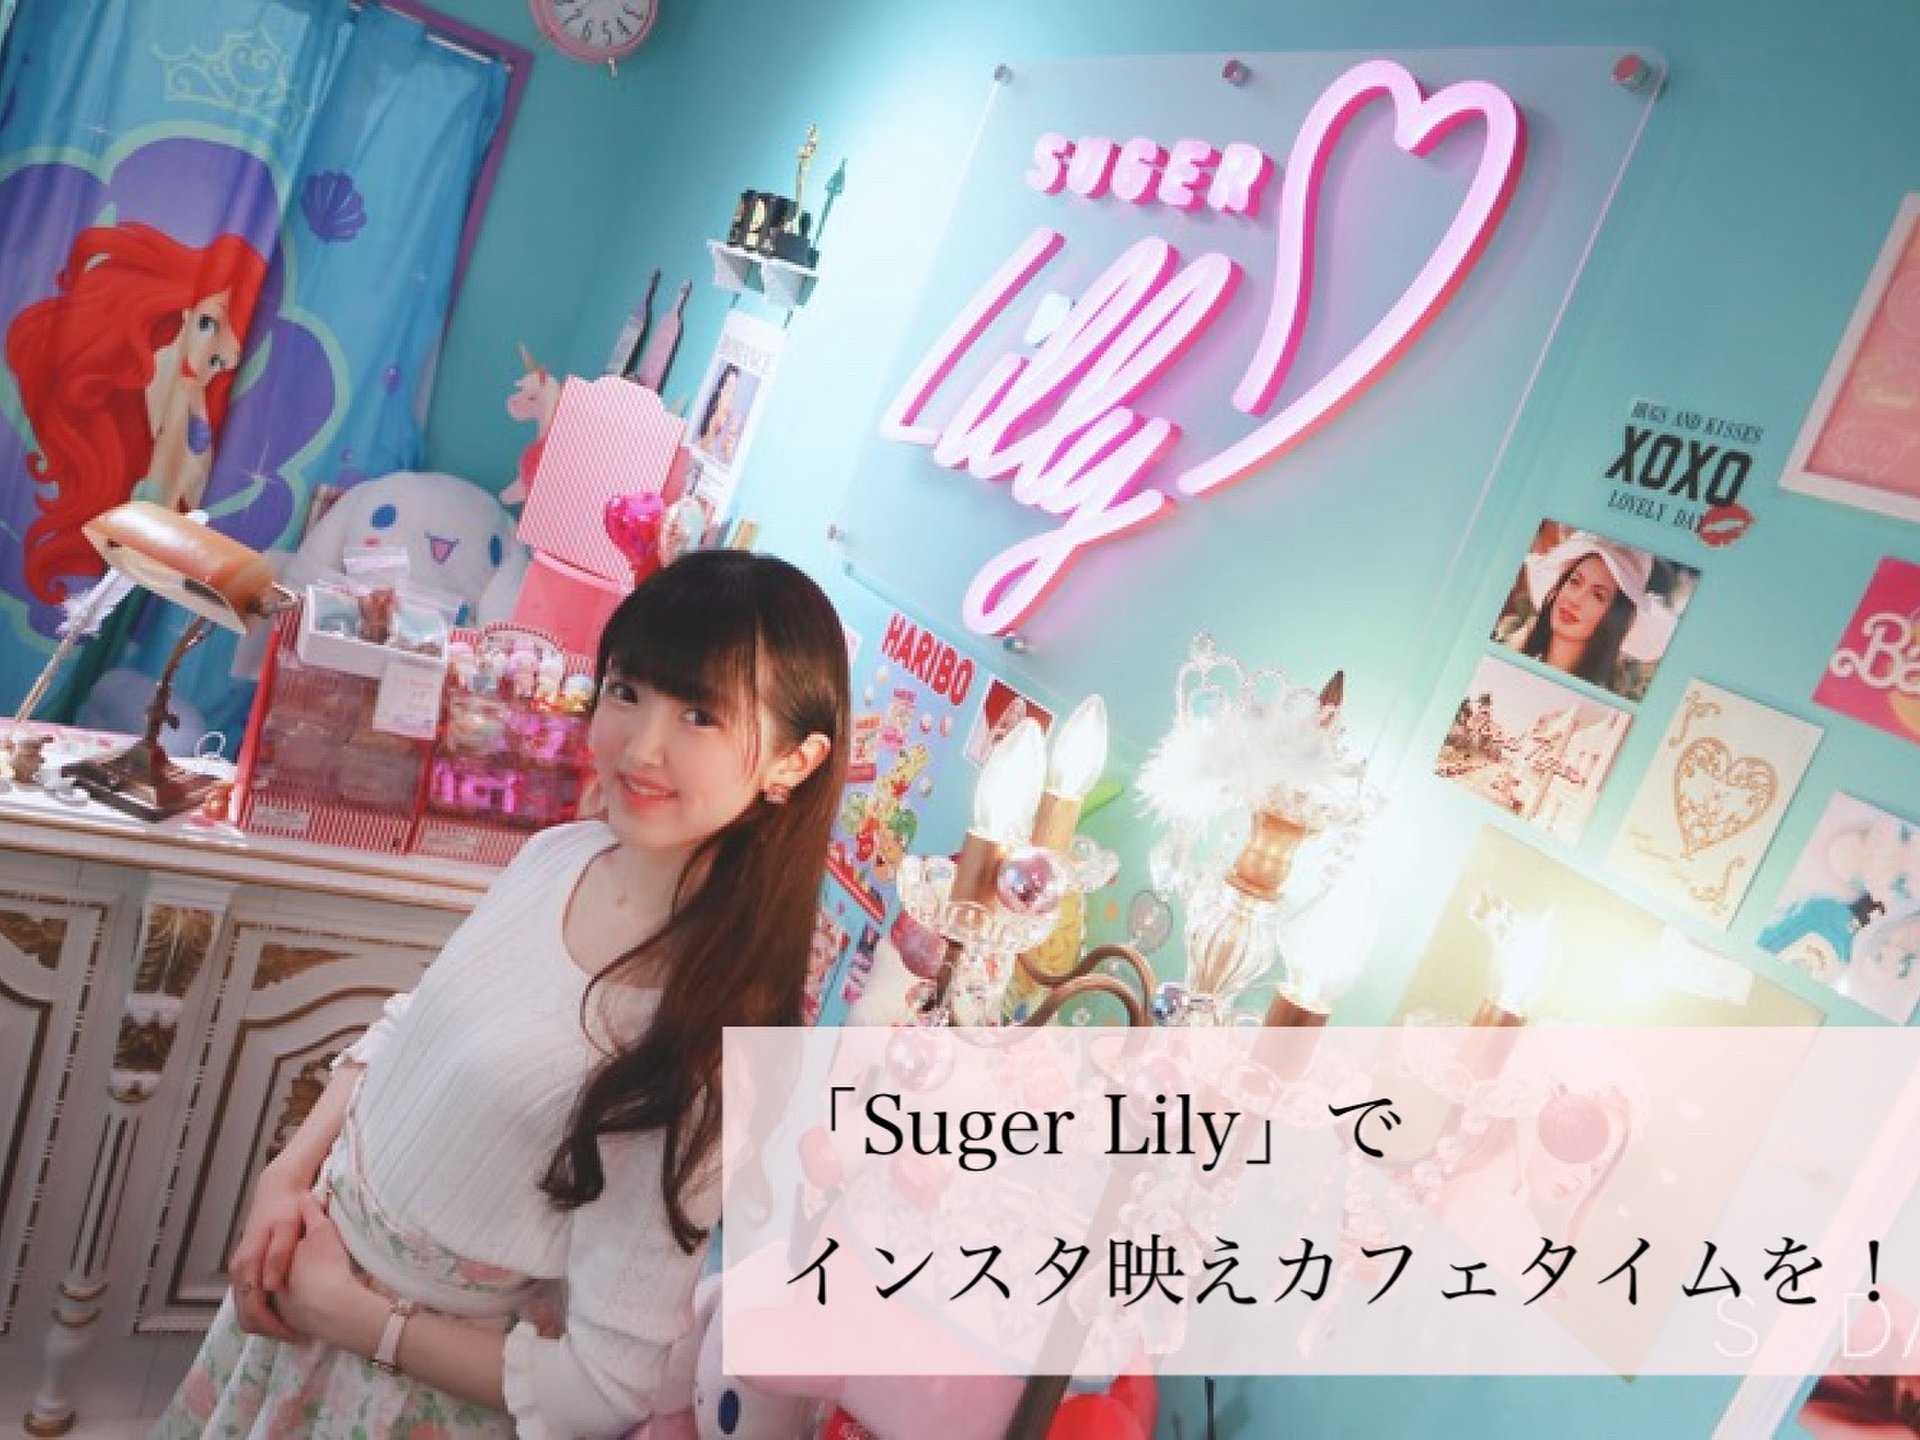 「Suger Lily」がポップでキュート♡原宿系カフェが吉祥寺に!?